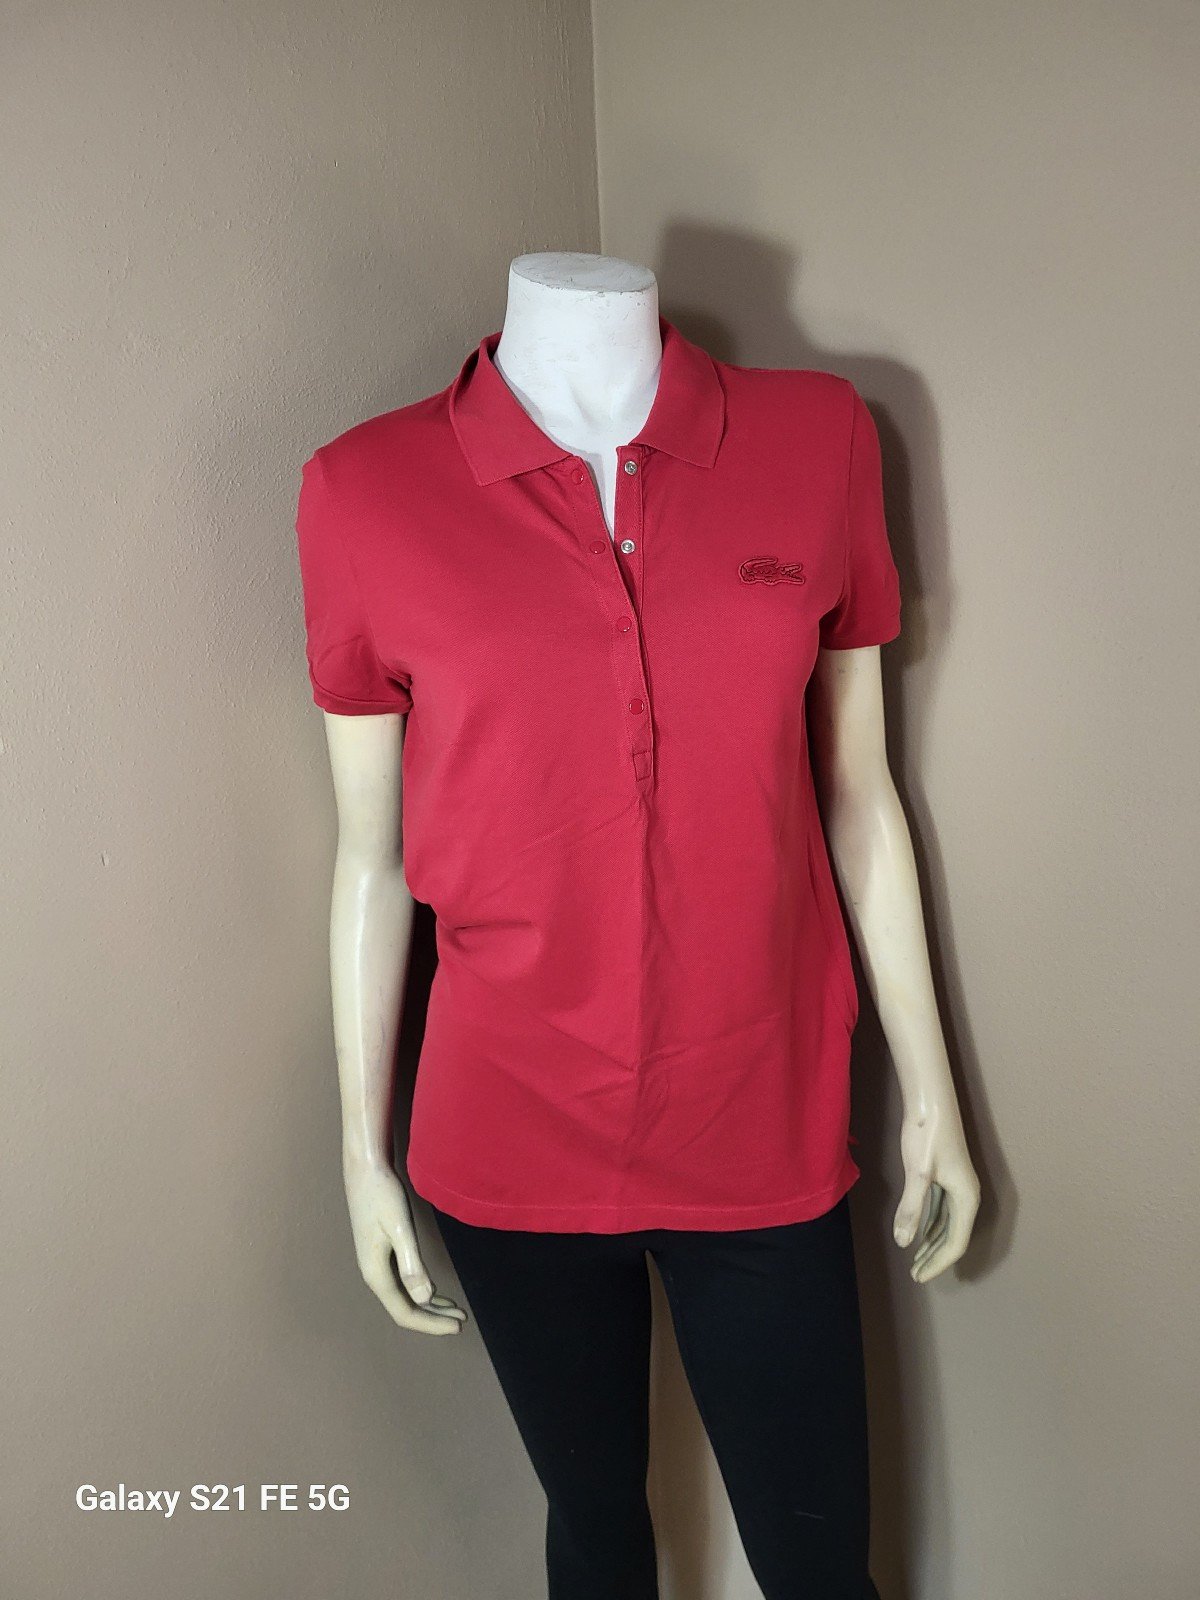 Promotions  Lacoste Womens Pink Polo Shirt Sz 42/L
.in 